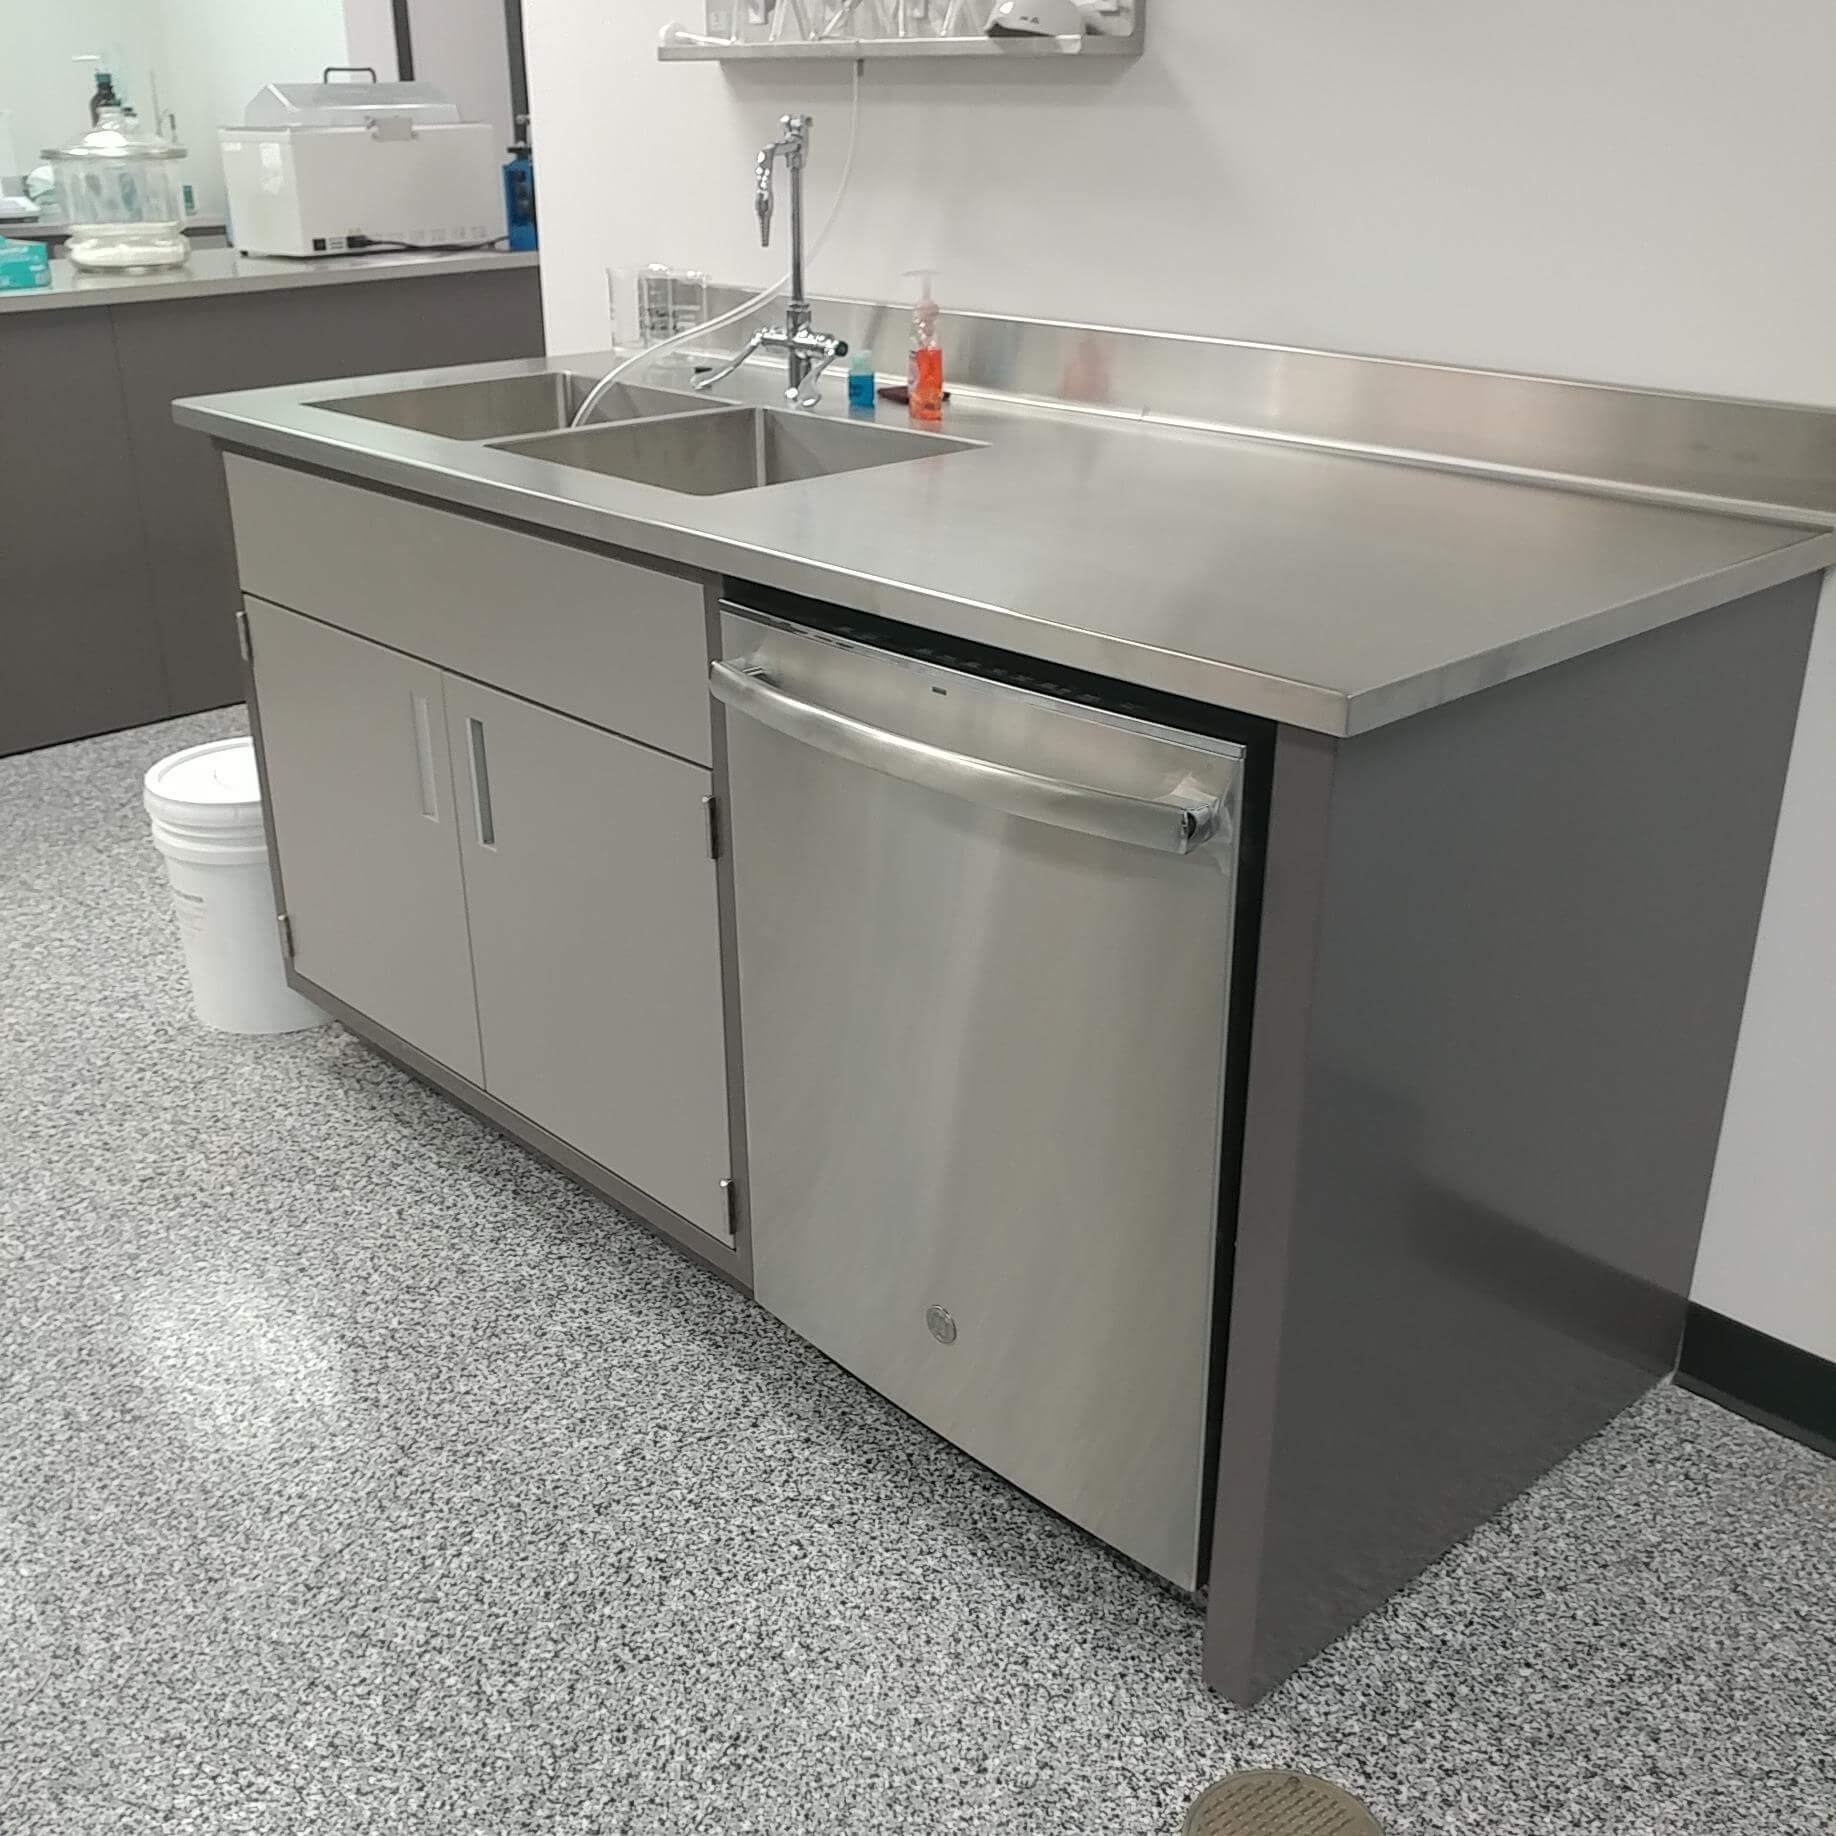 Lab designed with custom stainless steel counters